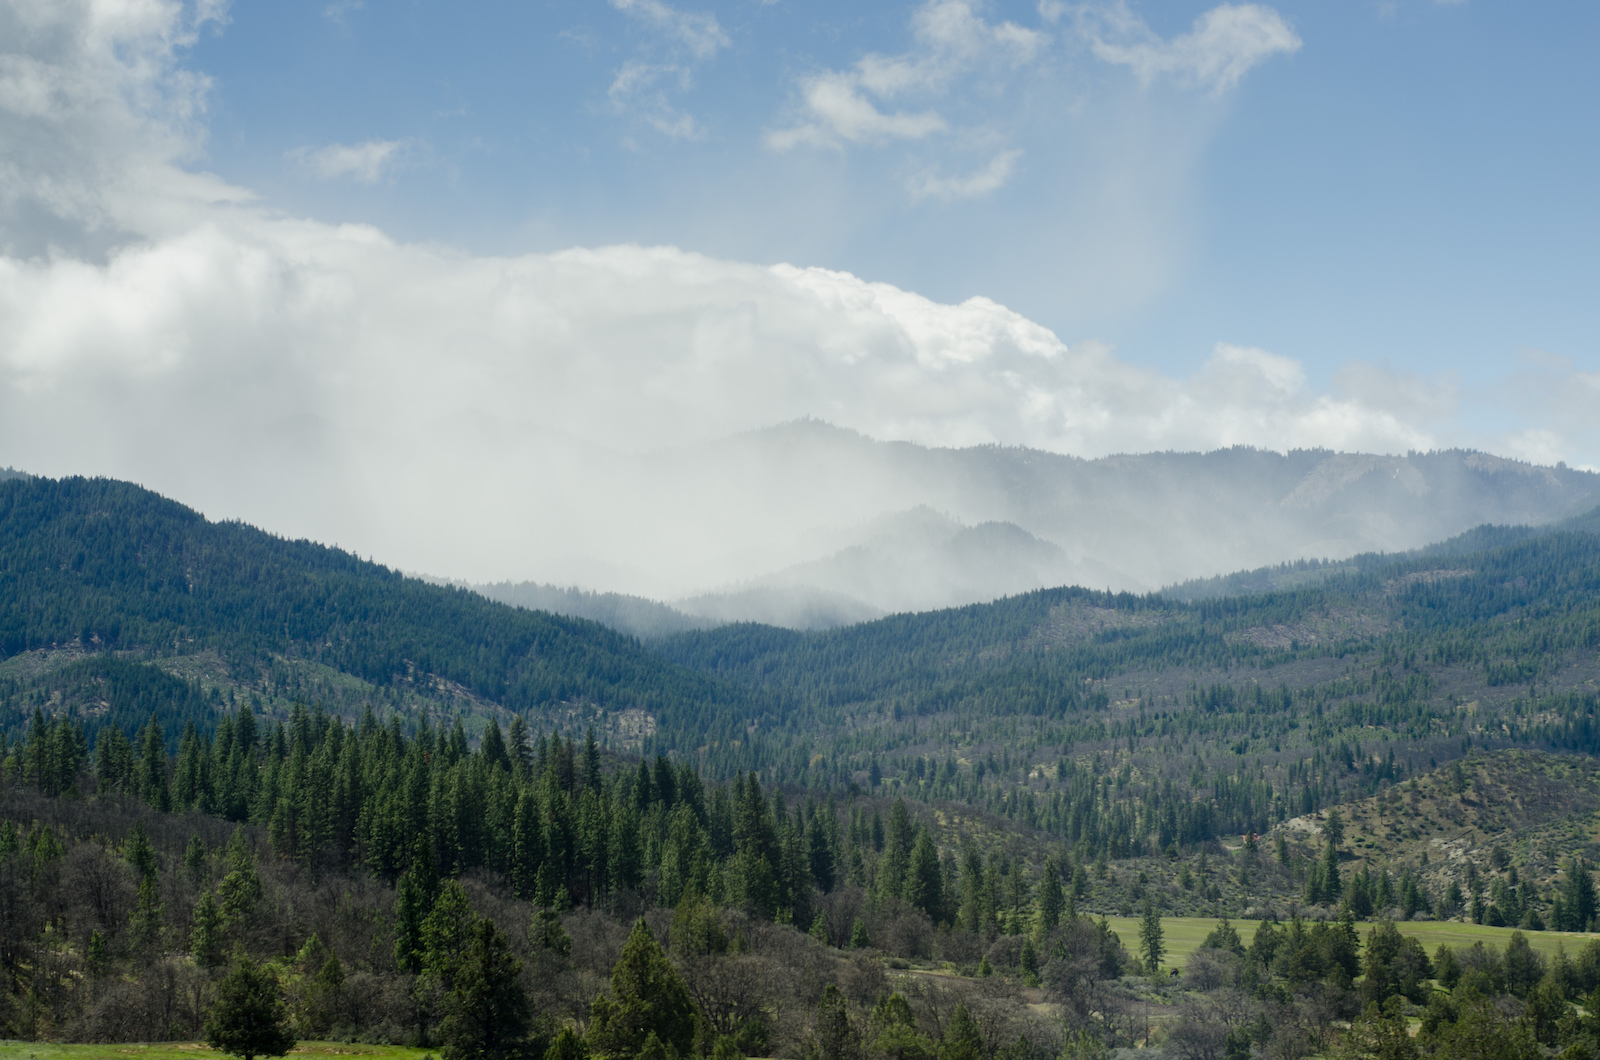 Snow and rain squalls were battling with the sunshine as we continued south through Ashland, Oregon.